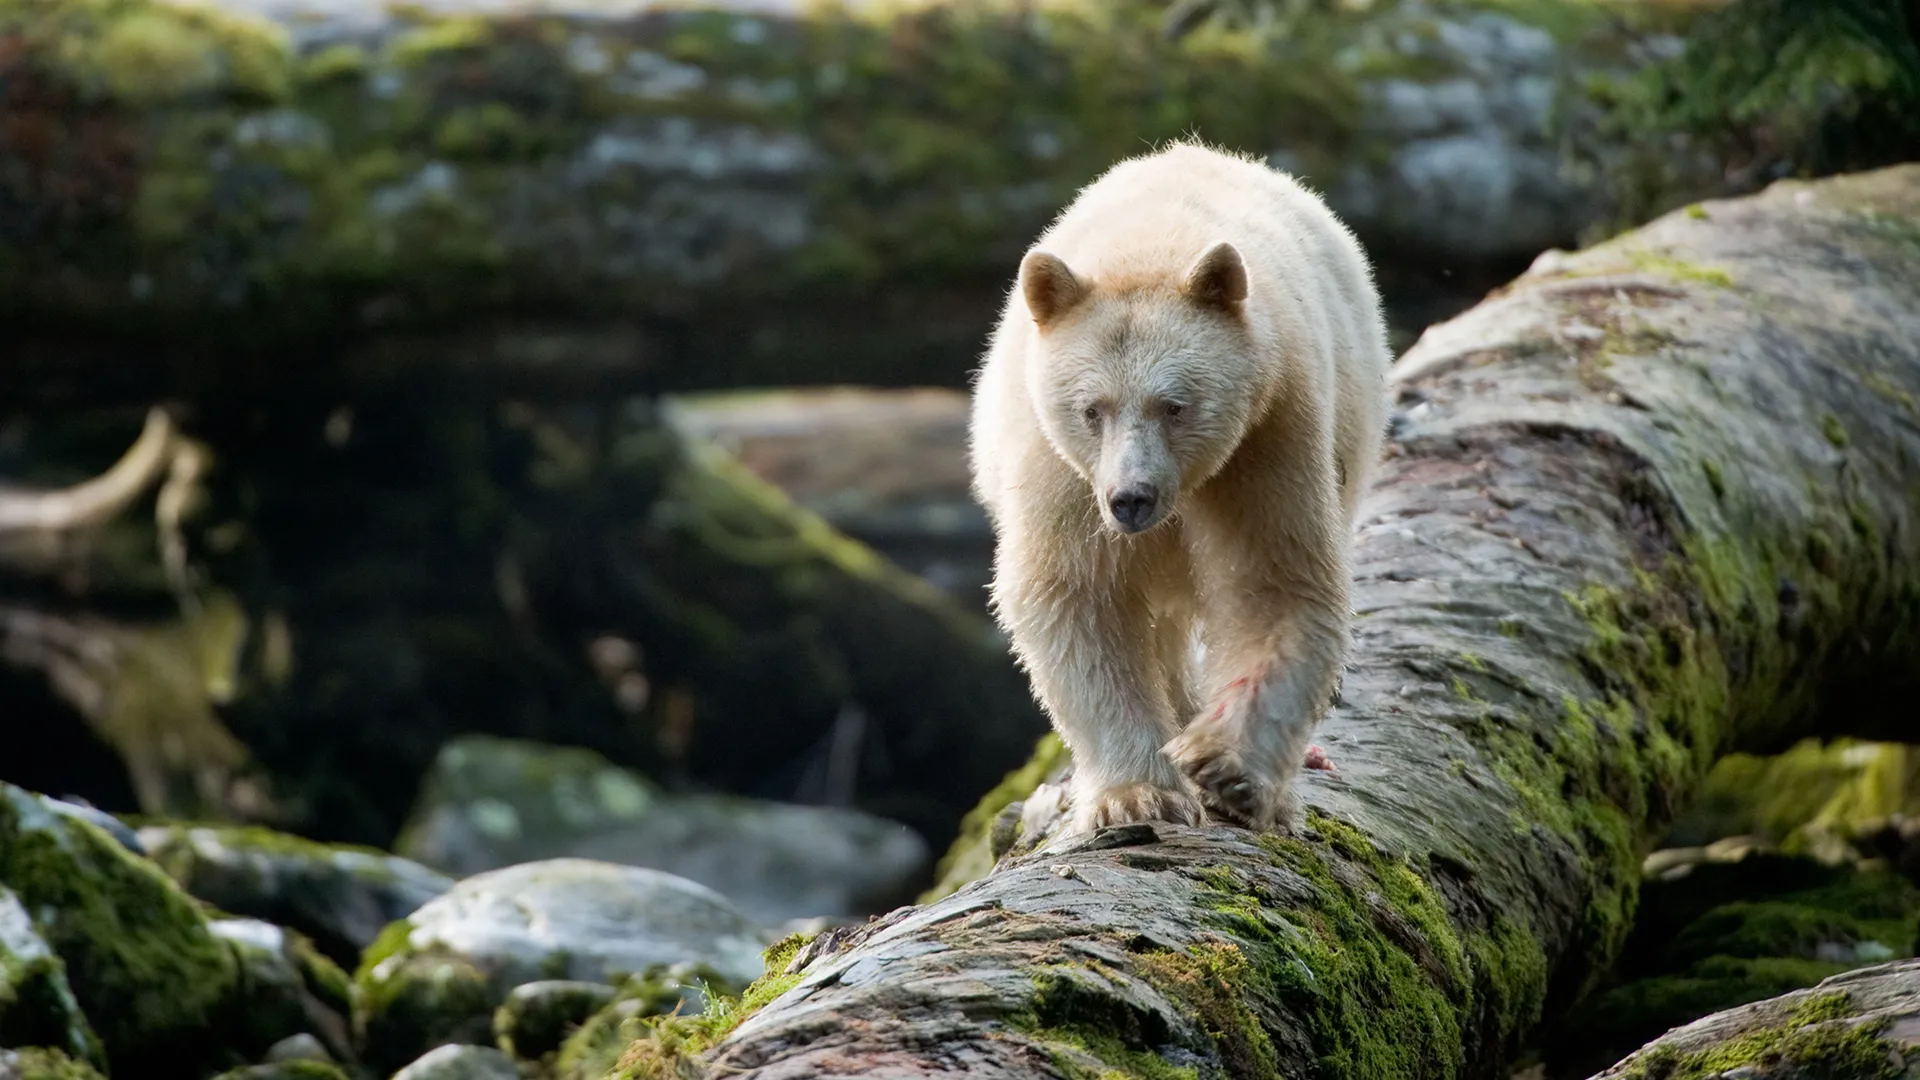 Grizzly bears, wildlife tours, located in the Great Bear Rainforest